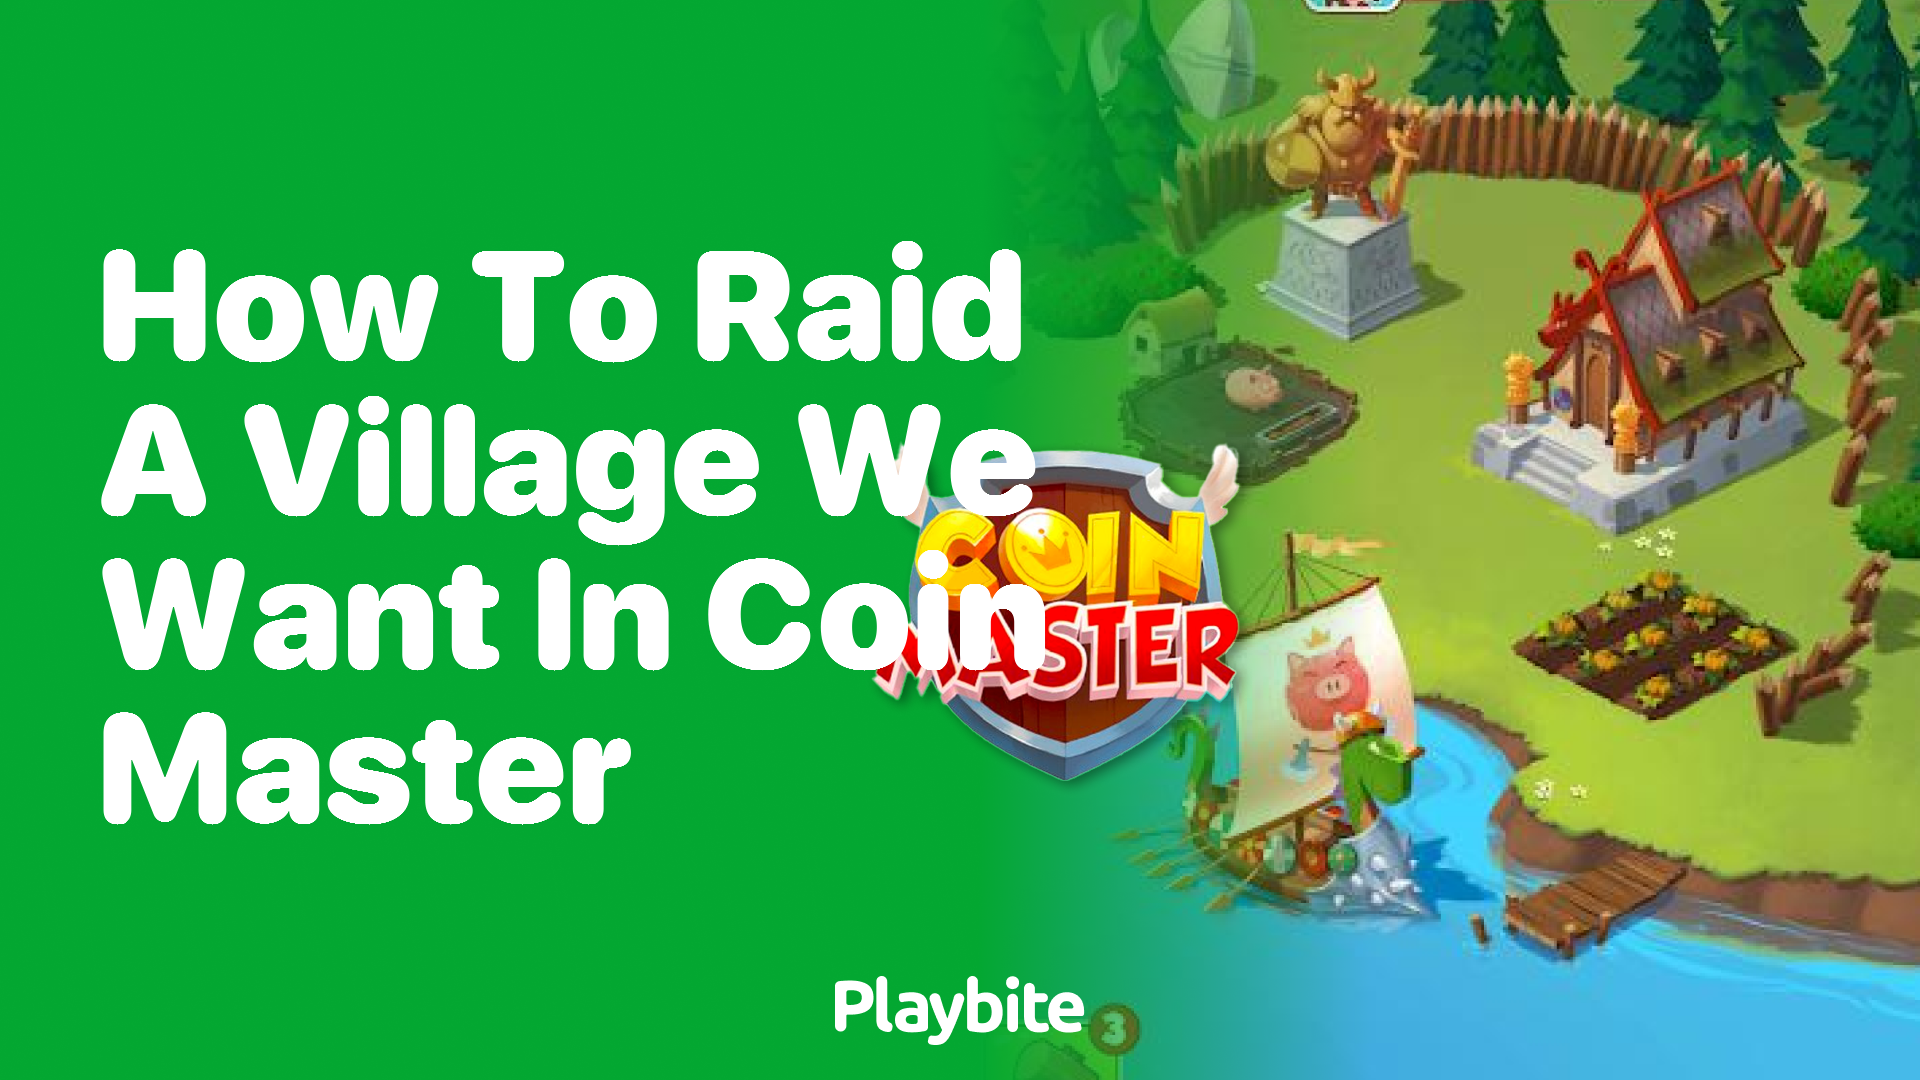 How to Change Your Raid in Coin Master - Playbite